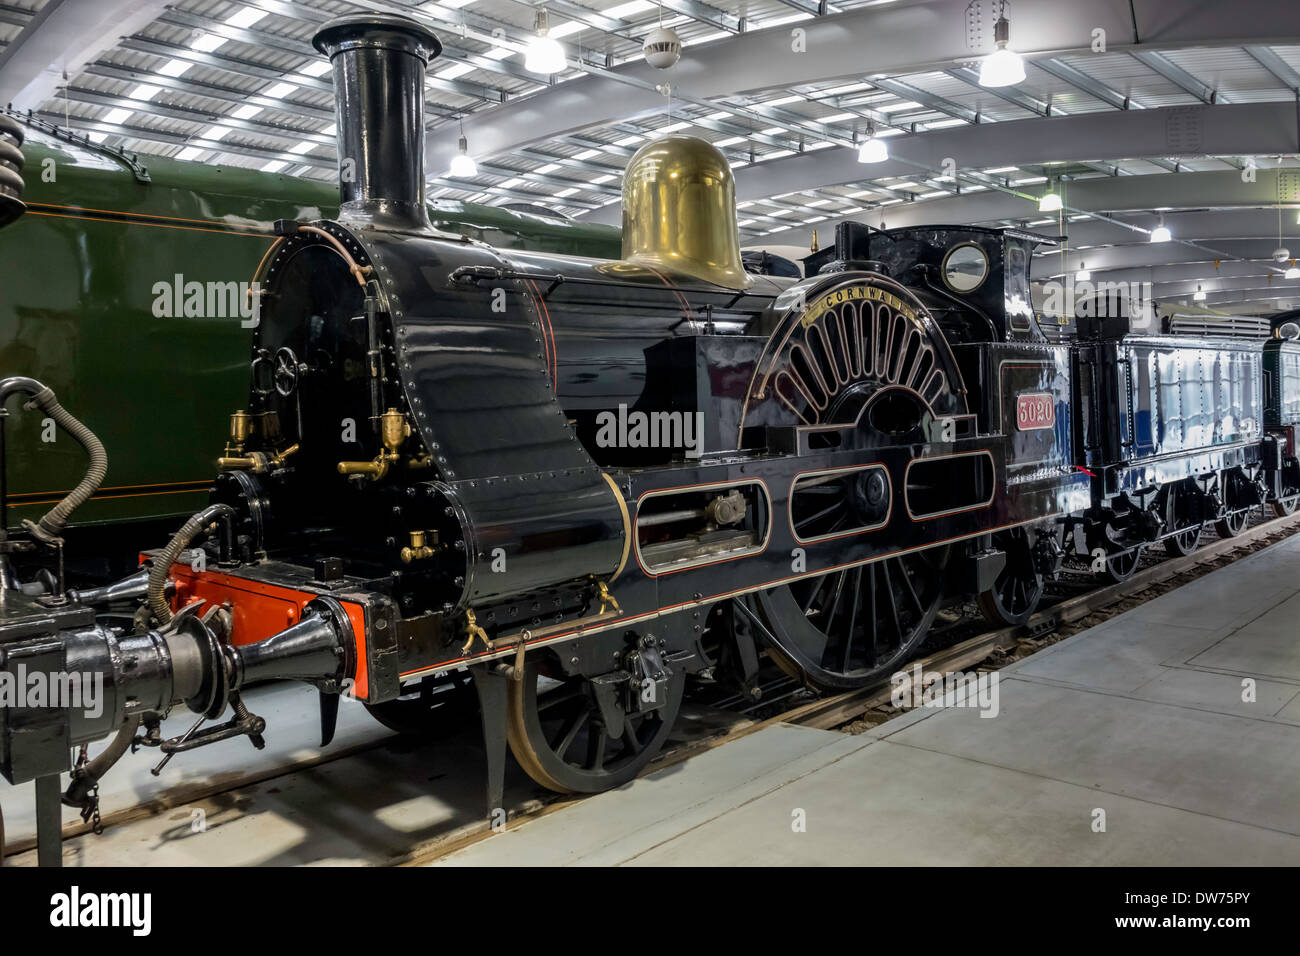 London North Western Railway No. 3020 2-2-2 Single express passenger locomotive built 1847 on display in the Museum at Shildon Stock Photo